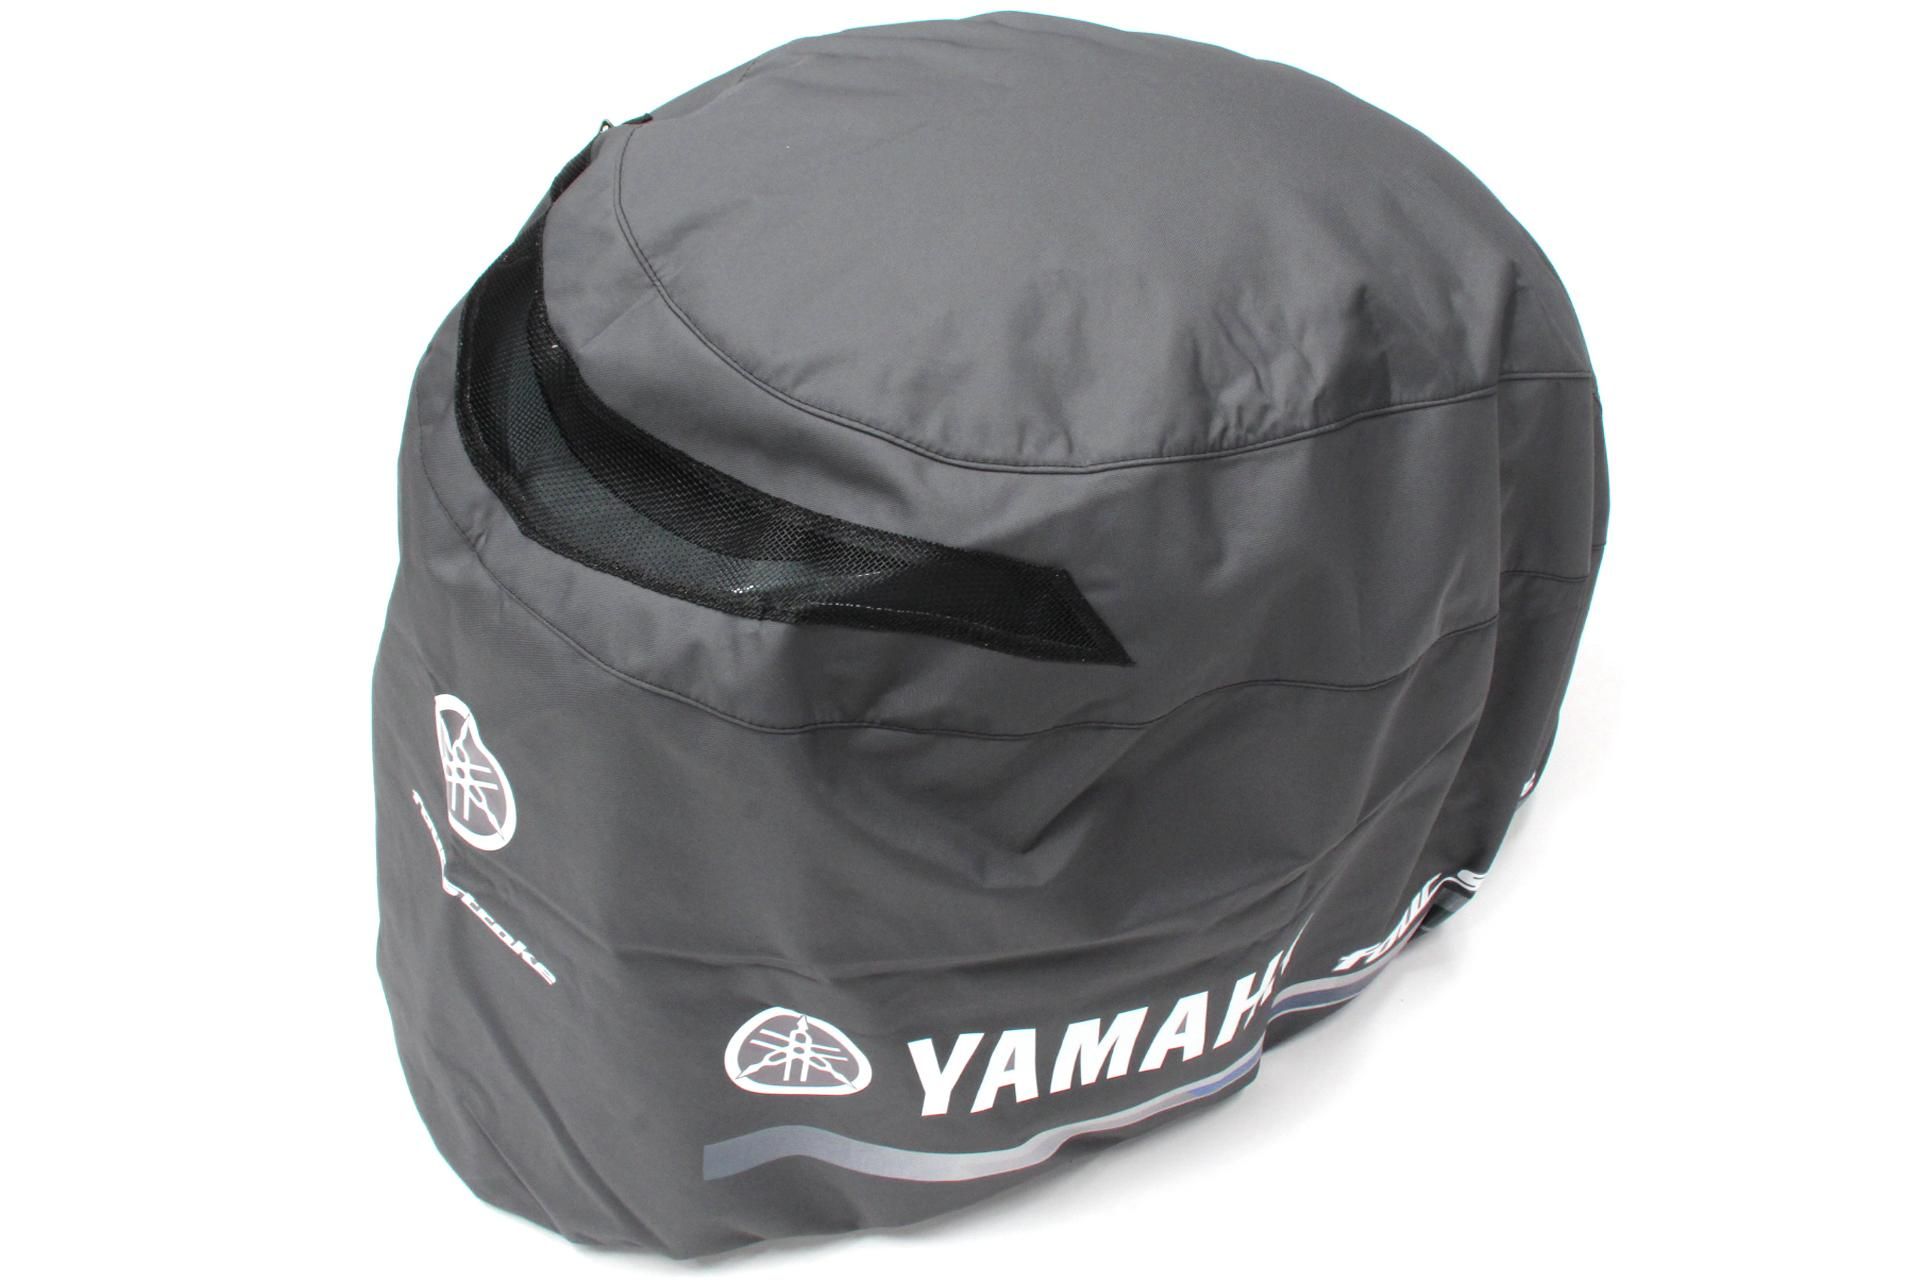 Yamaha outboard motor vented cover